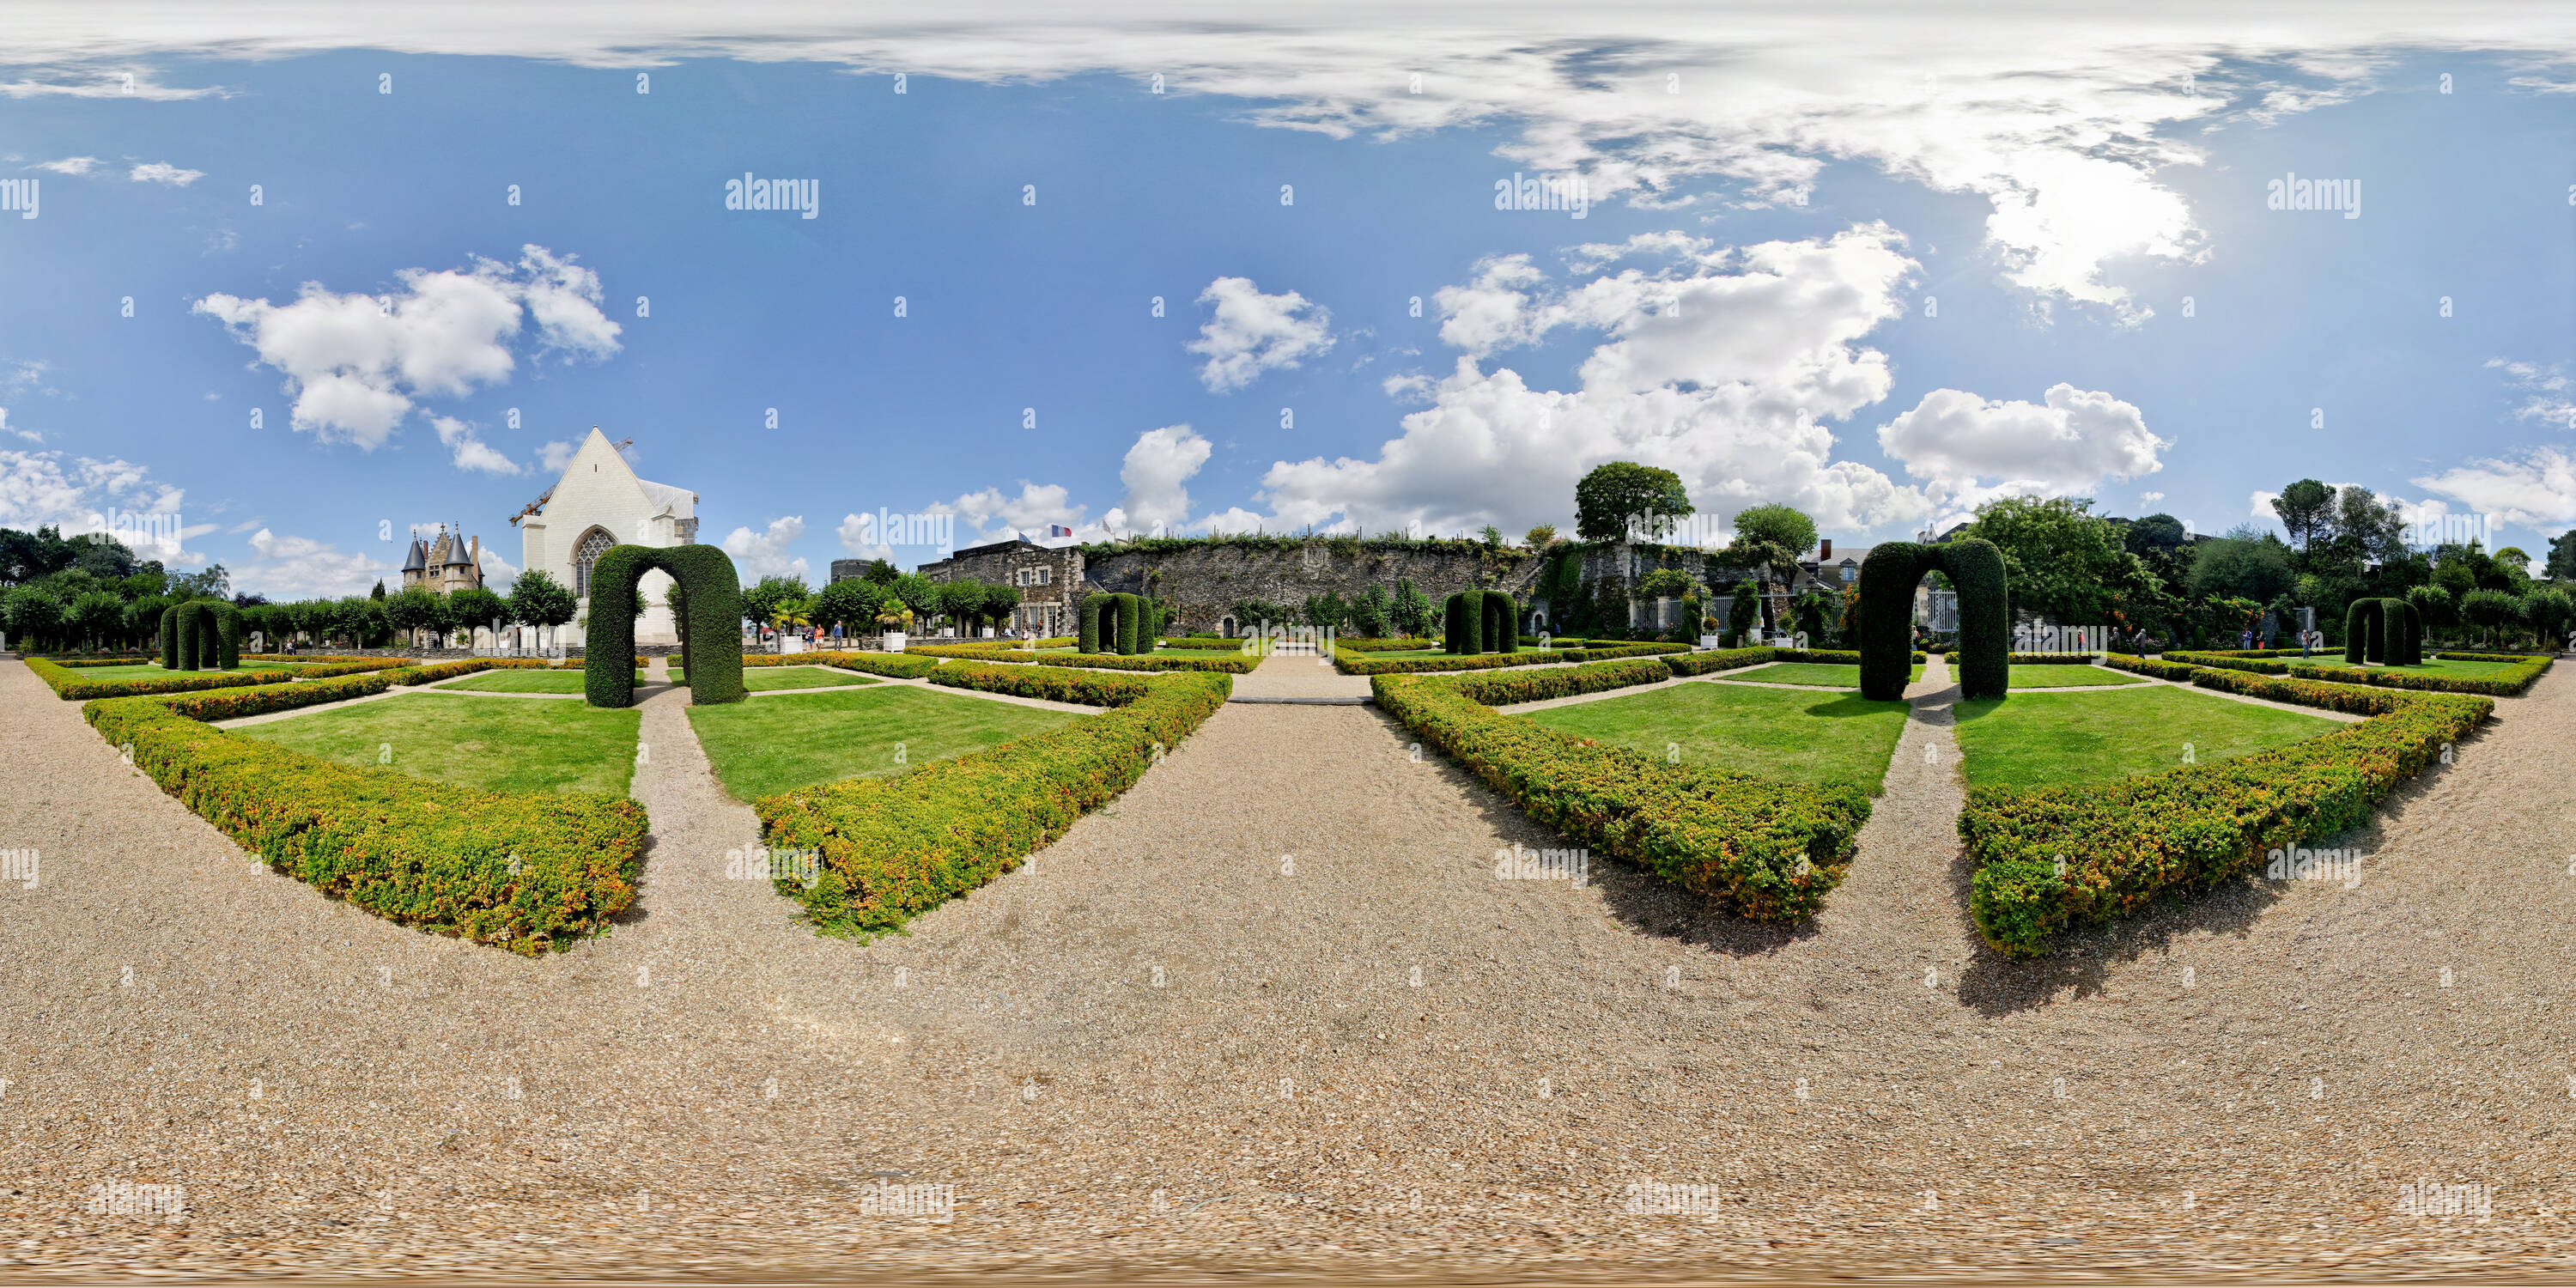 360 degree panoramic view of Chateau de Angers, France